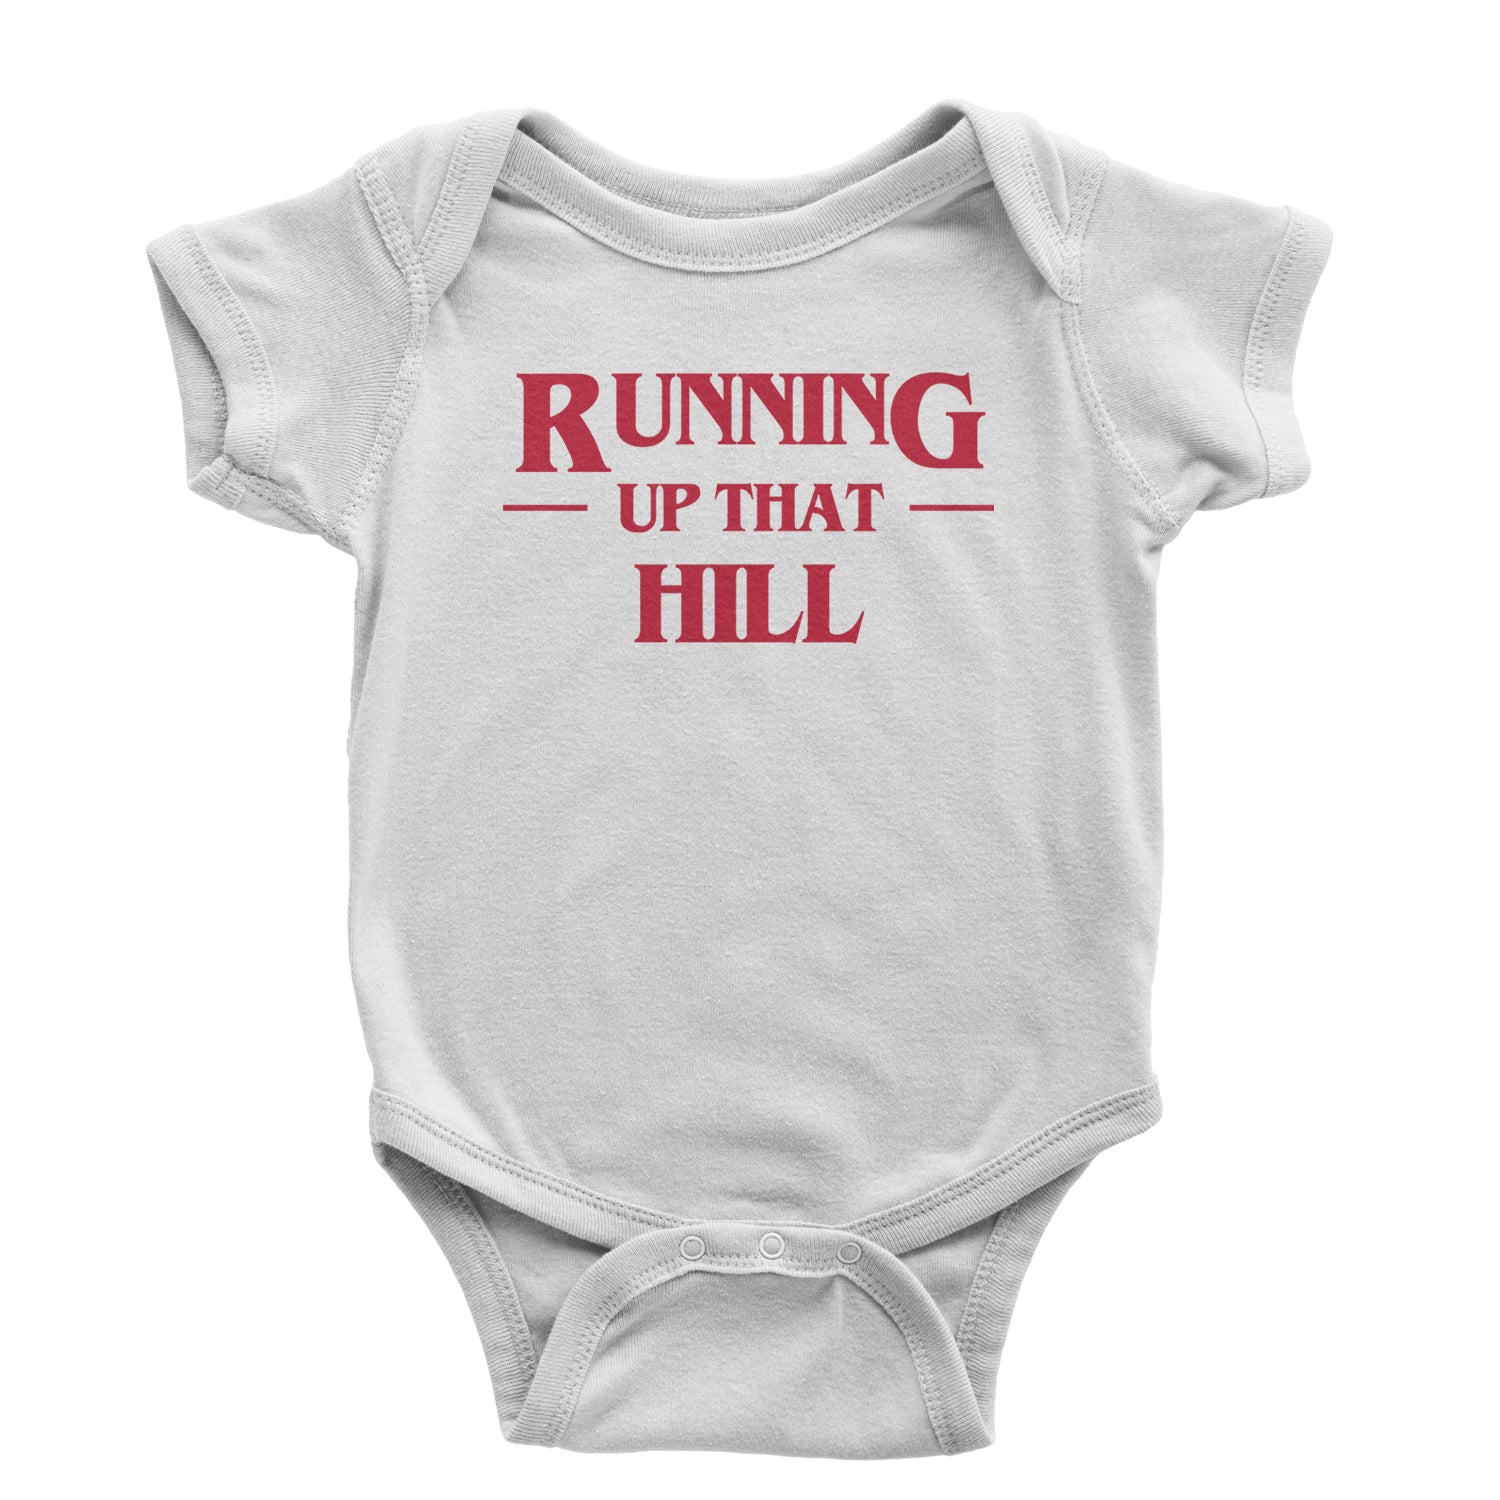 Running Up That Hill Infant One-Piece Romper Bodysuit and Toddler T-shirt 4, don’t, eleven, four, friends, lie, season by Expression Tees